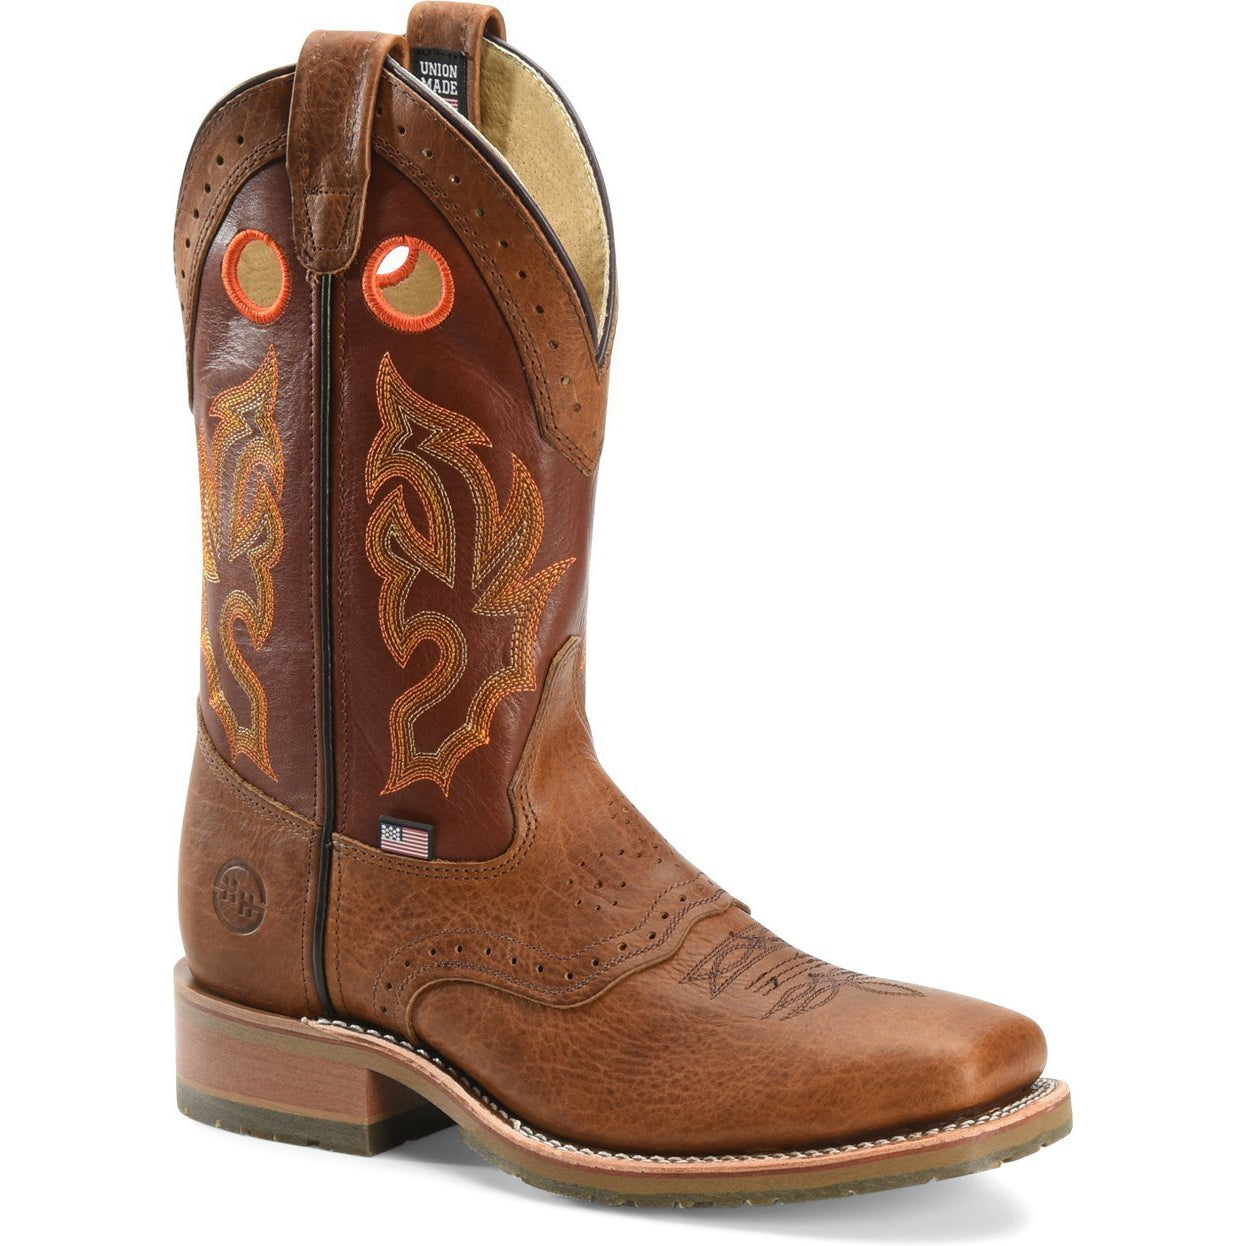 Double H Men's Mickey 12" Steel Toe USA Made Western Work Boot- DH5400 8 / Medium / Brown - Overlook Boots